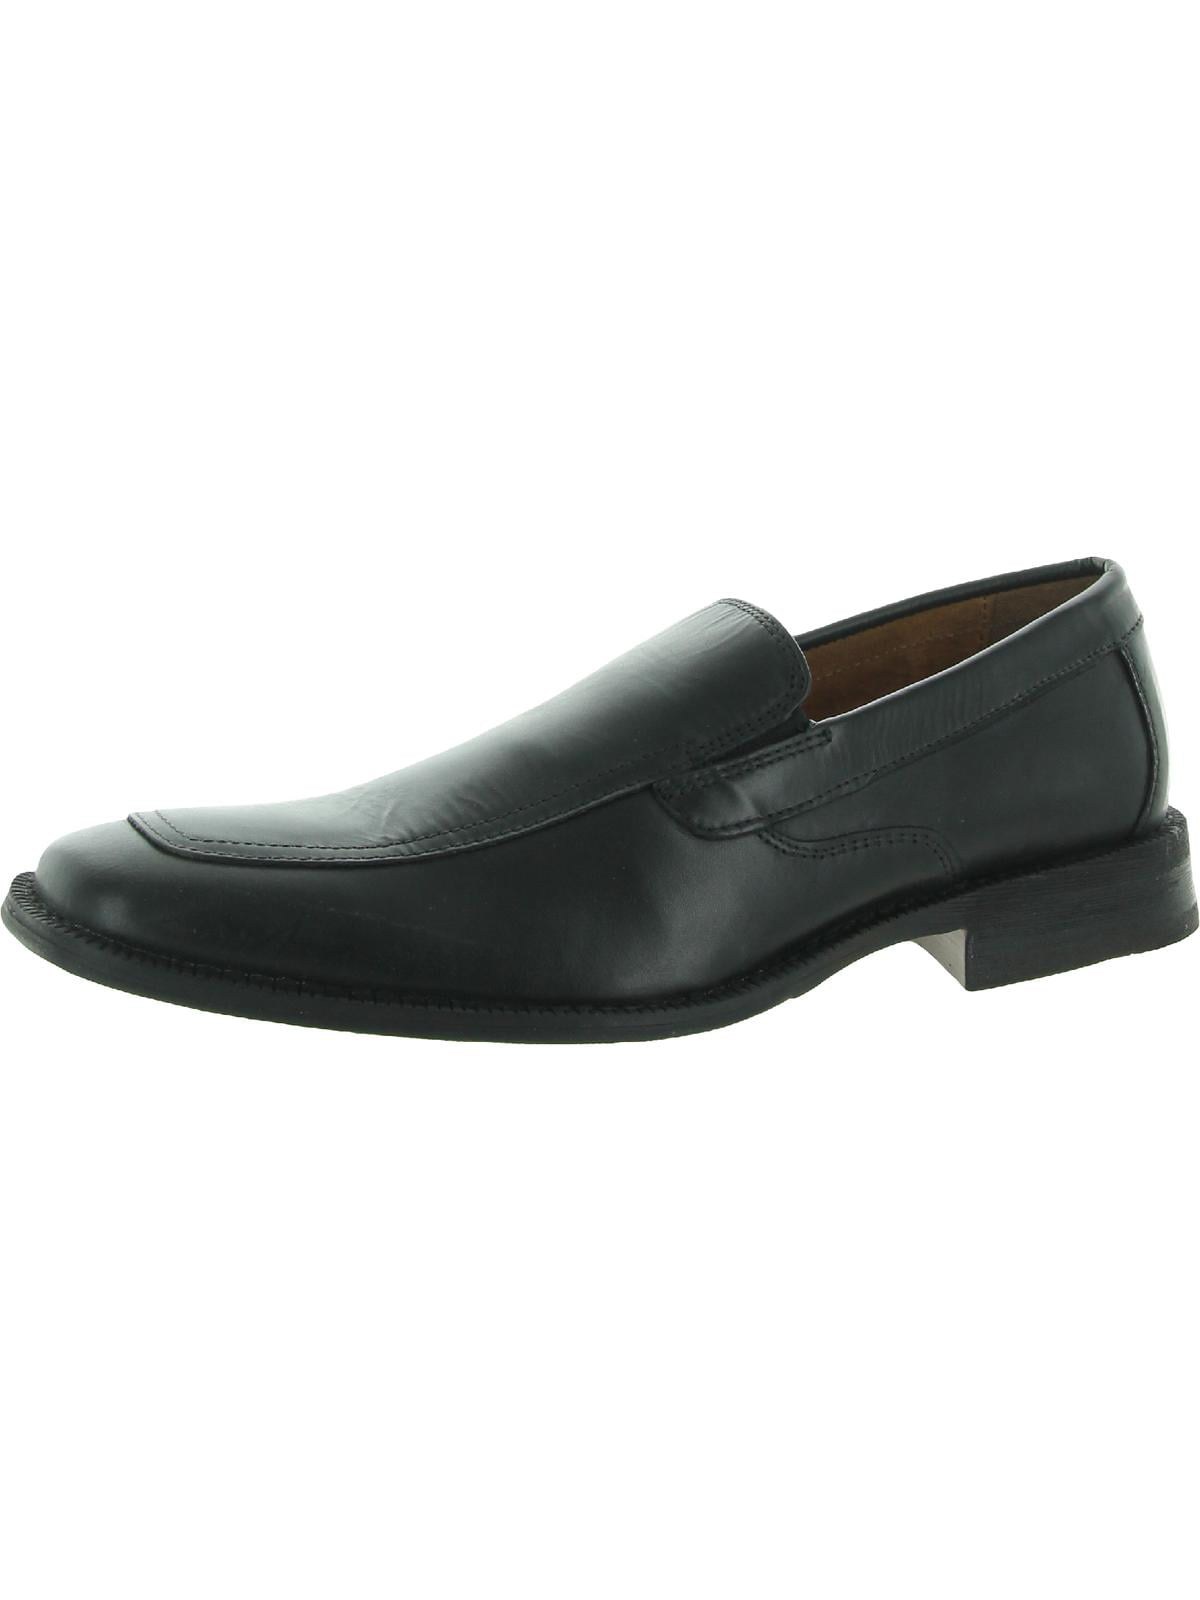 Details about   Hush Puppies Bloke Black Leather Slip On Casual Dress Formal Business Shoes Mens 